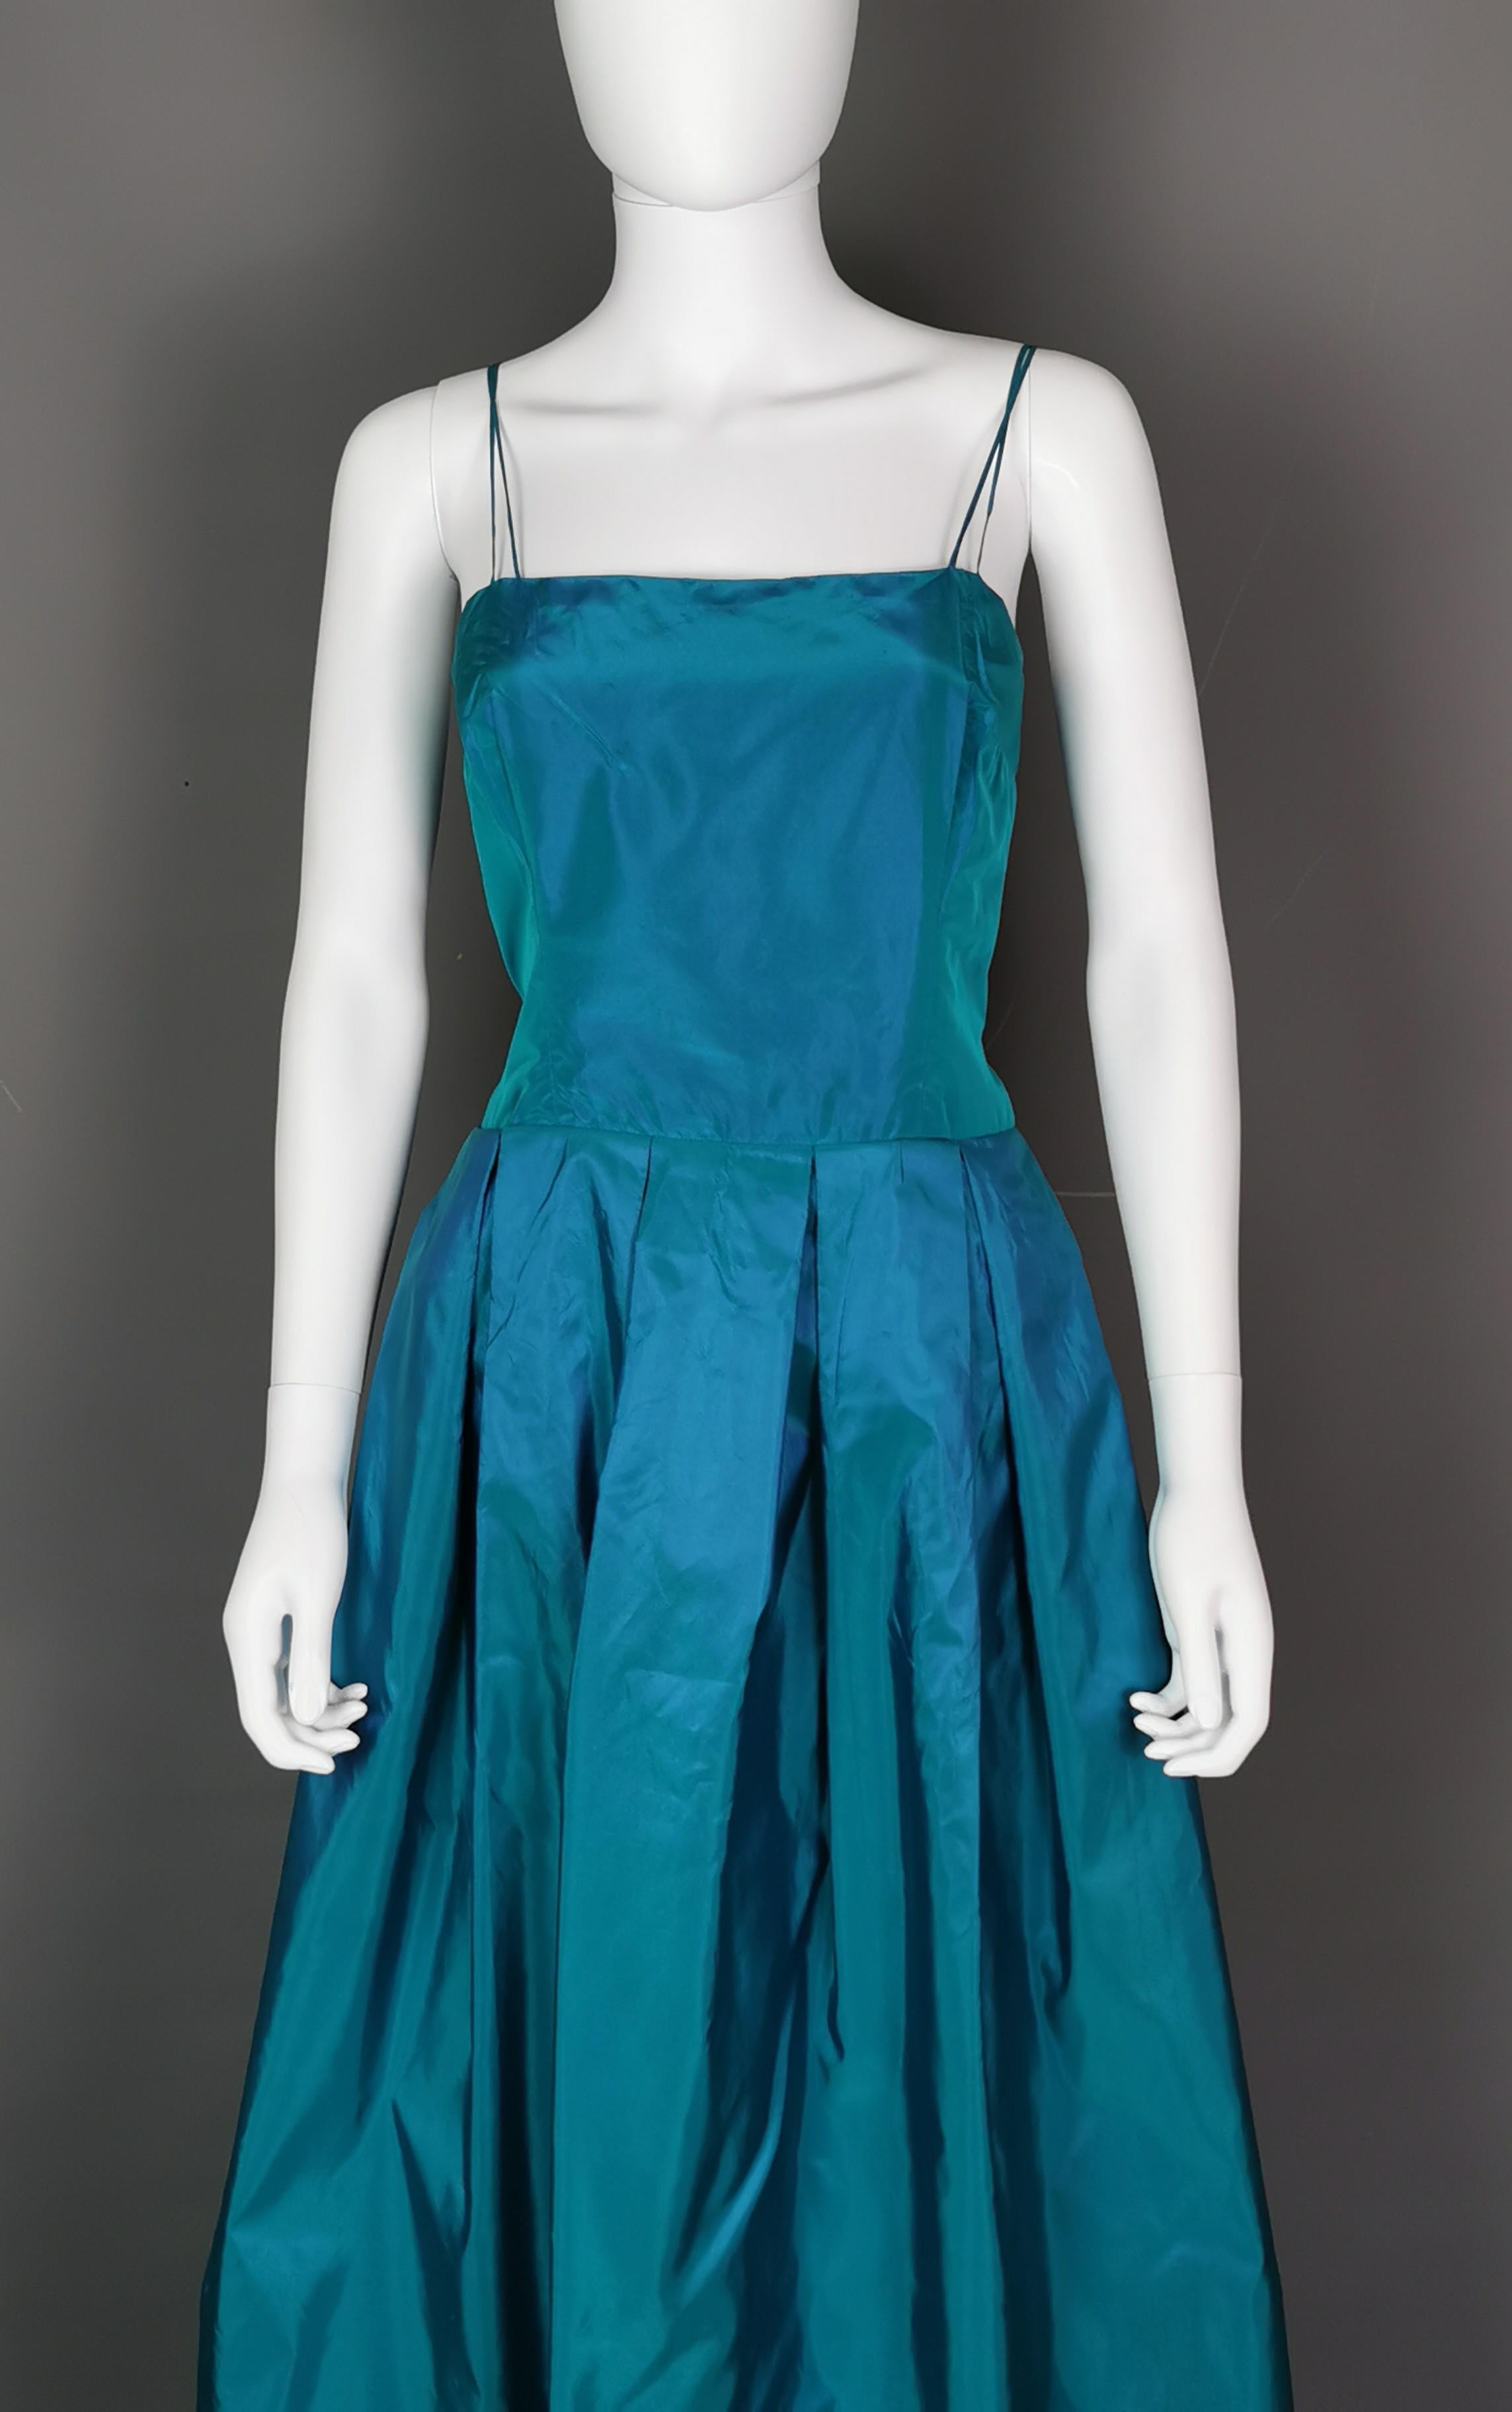 Women's Vintage Hardy Amies teal blue silk taffeta two piece dress, Jacket, Evening gown For Sale